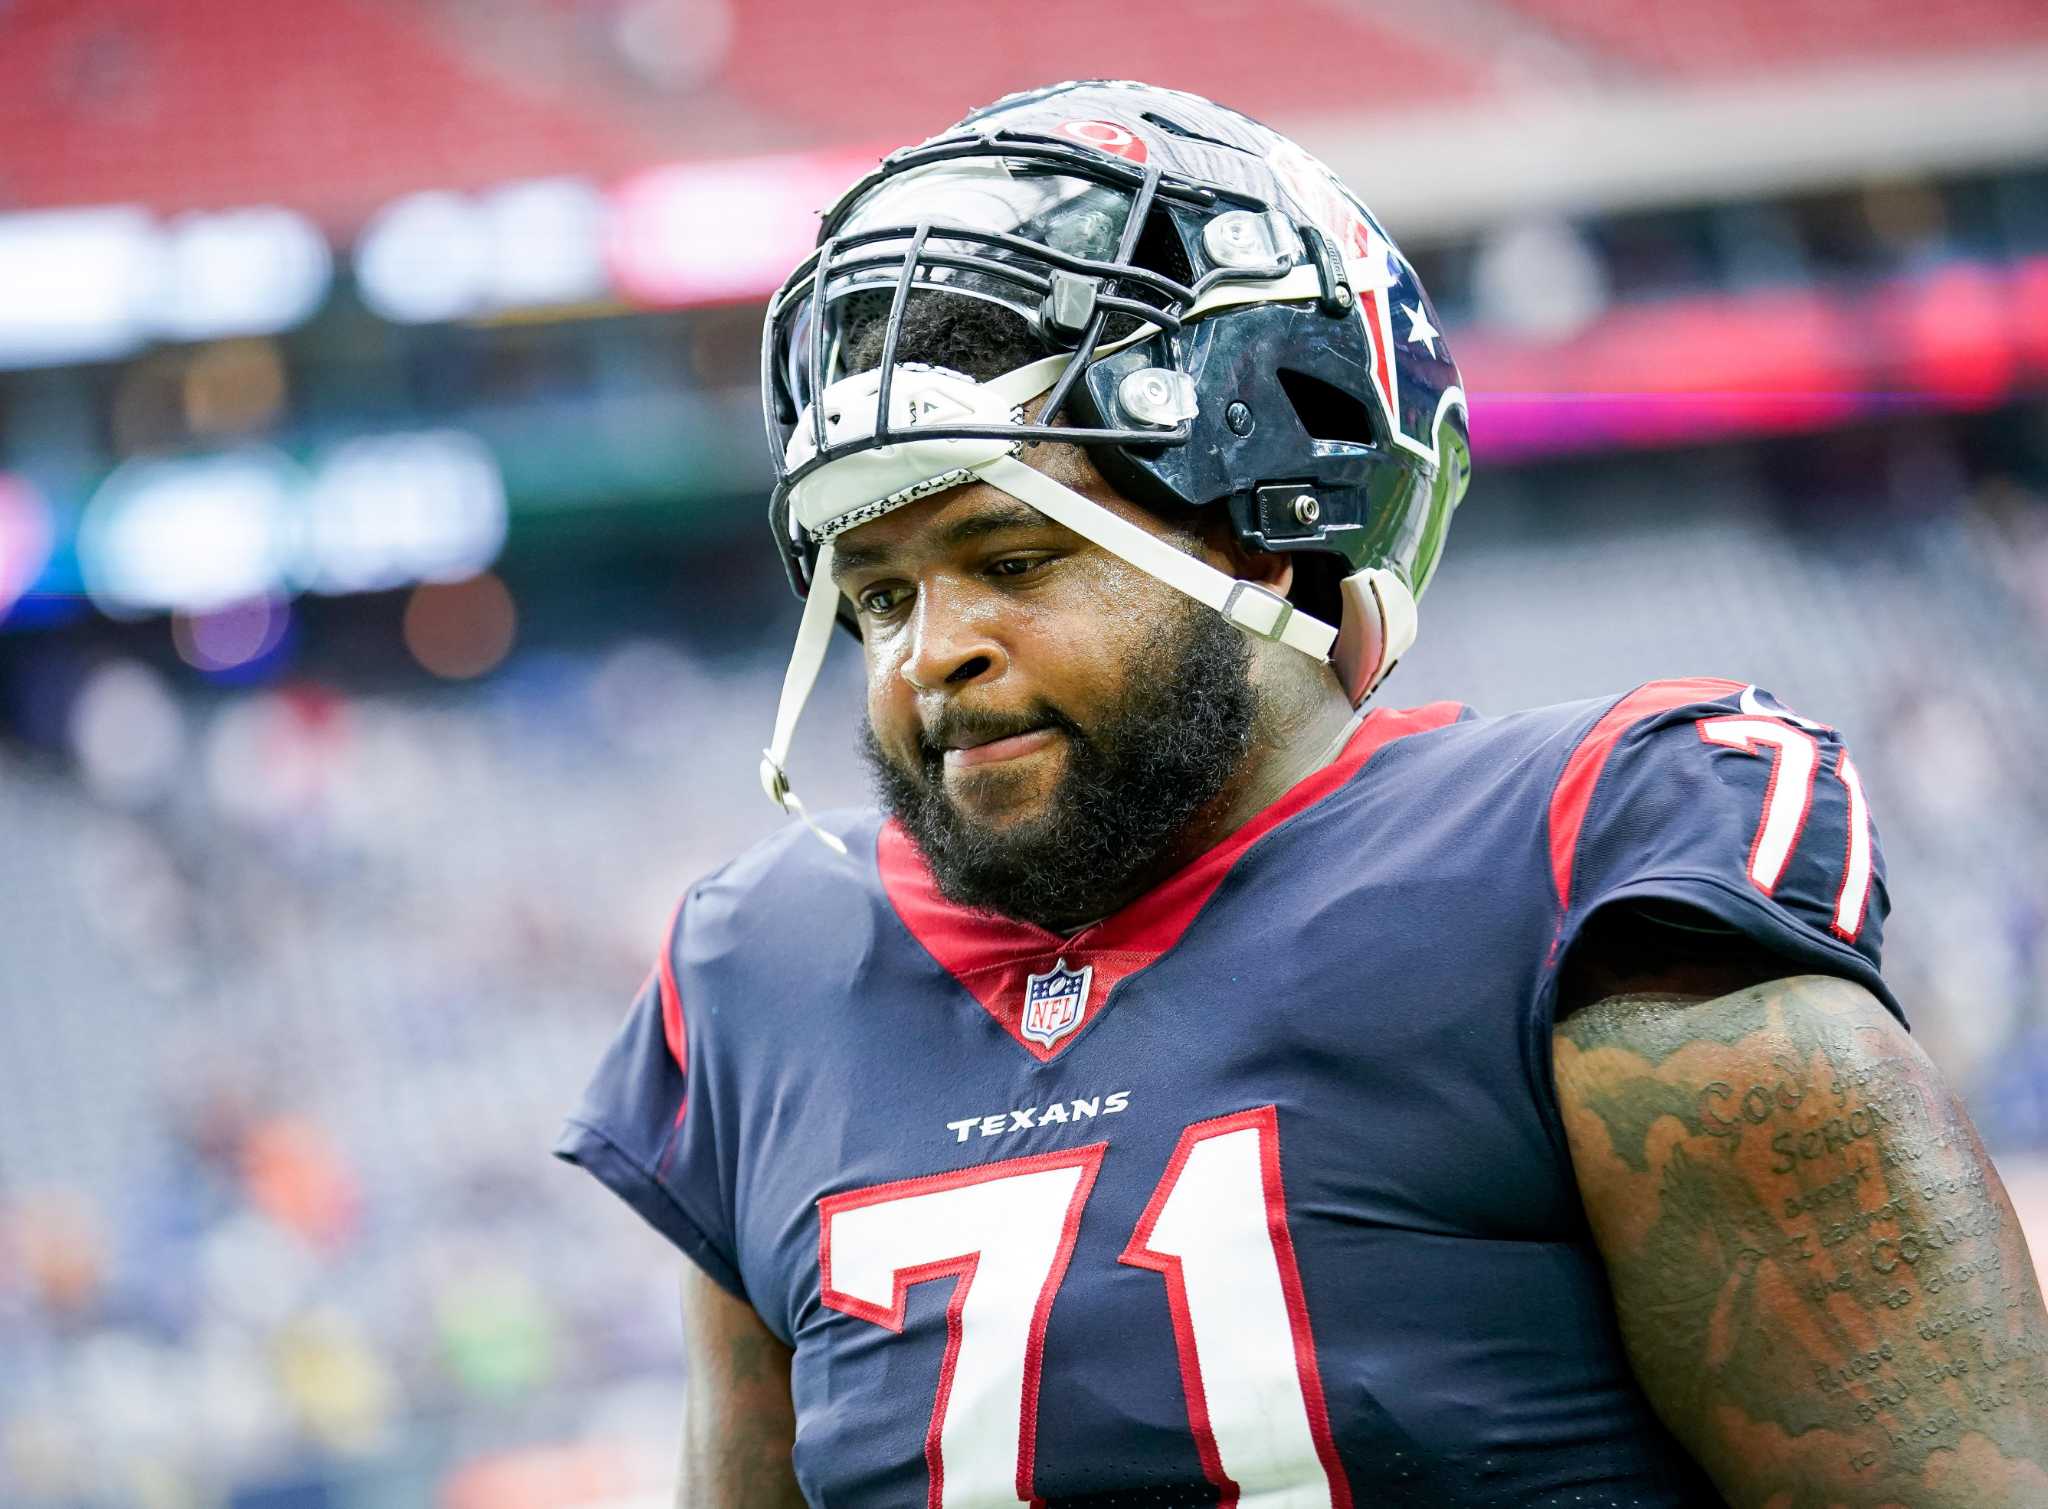 Right tackle shaping up as Tytus Howard's 2022 position for Texans